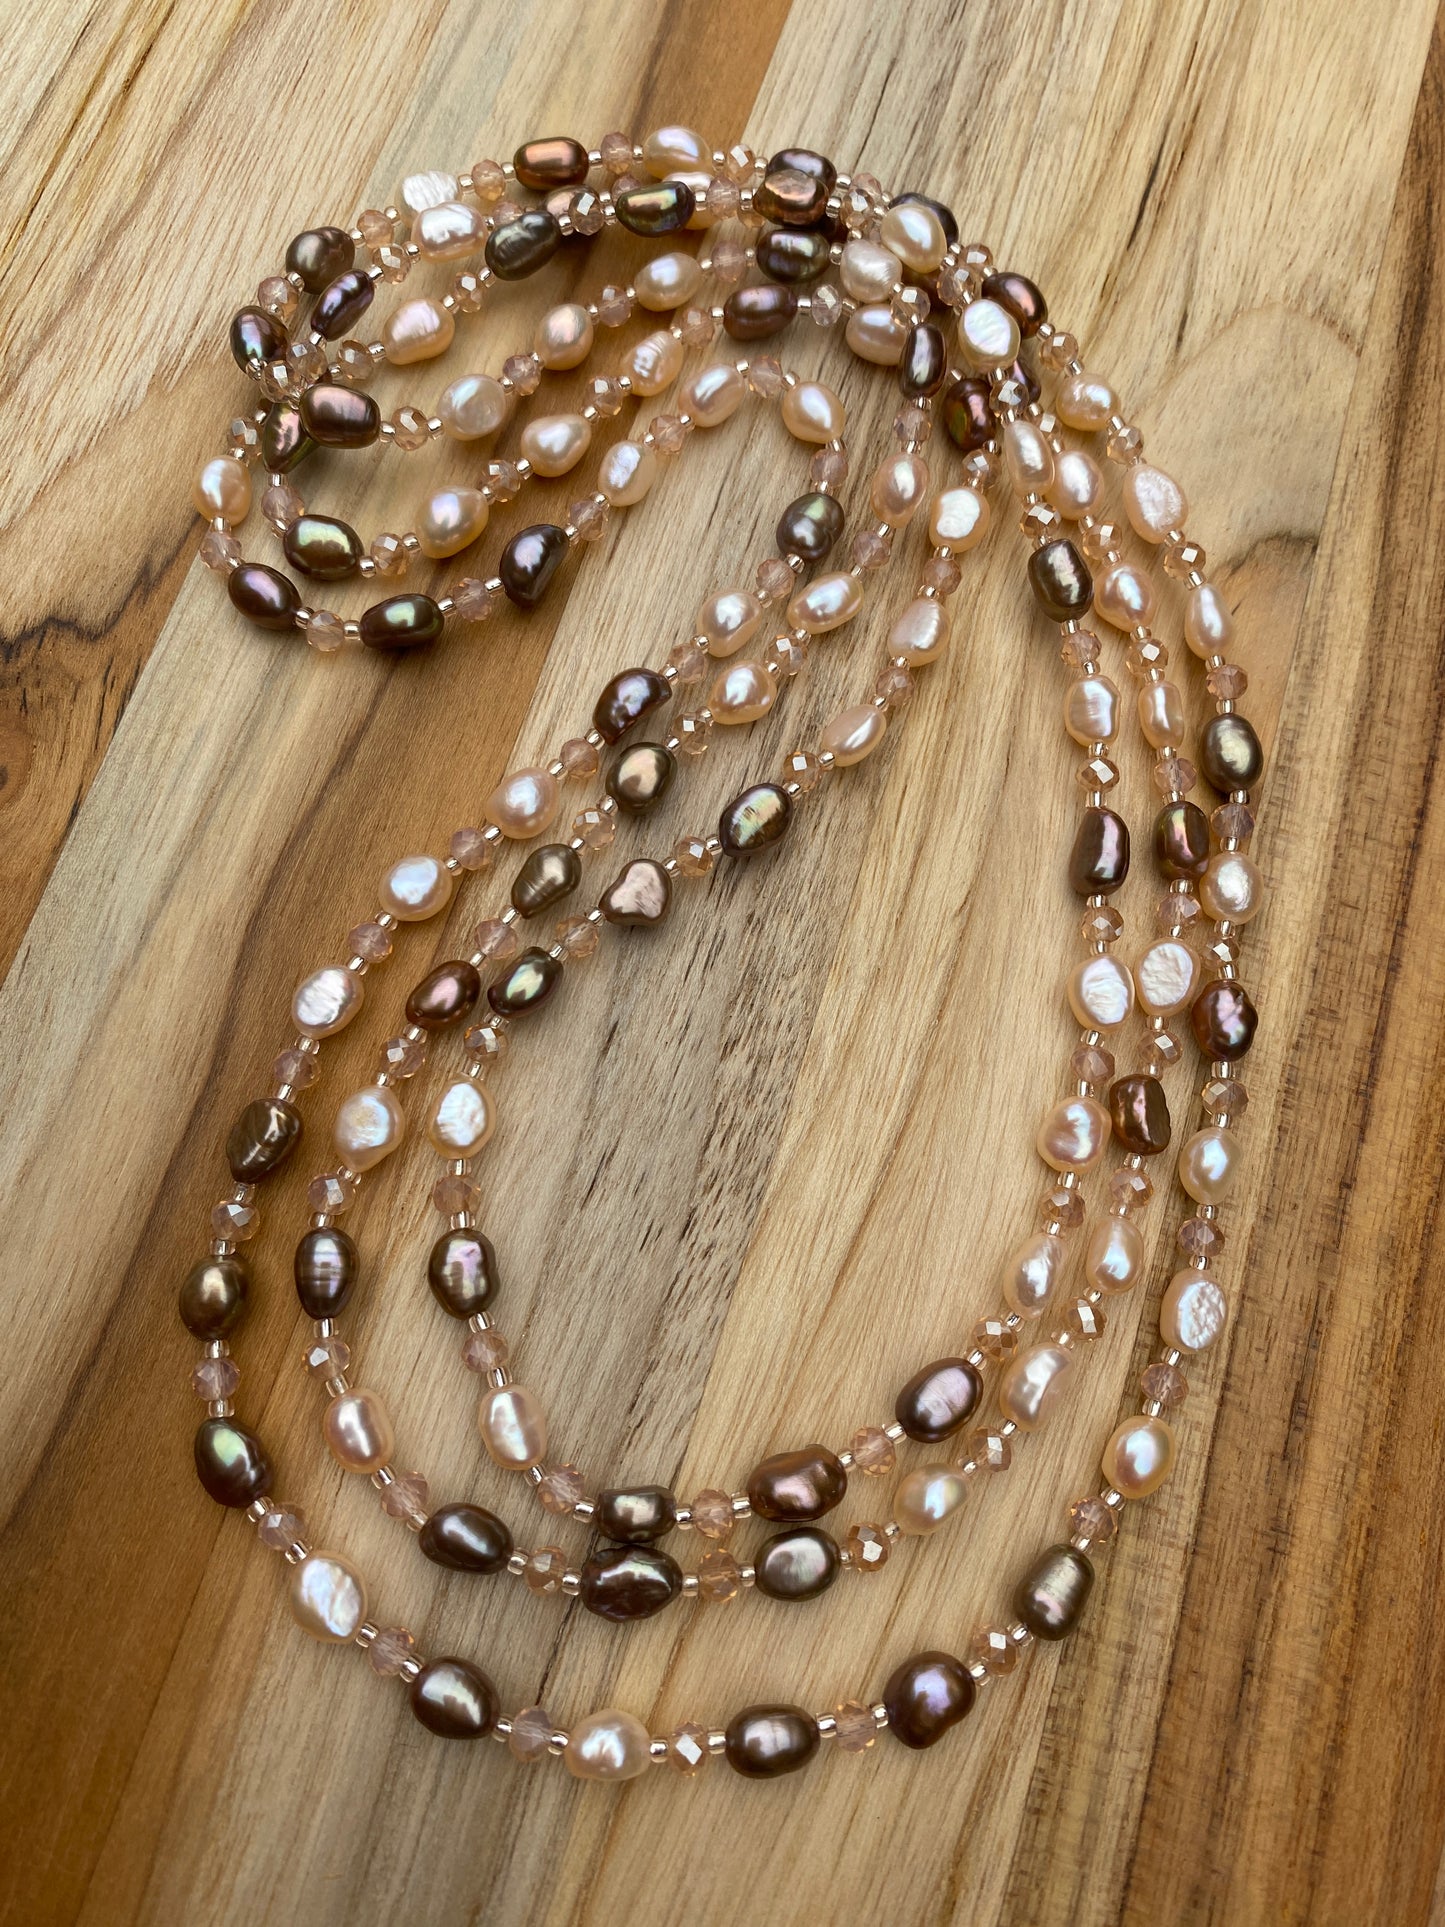 Long Dainty Brown and Cream Freshwater Pearl Beaded Necklace with Crystal Beads